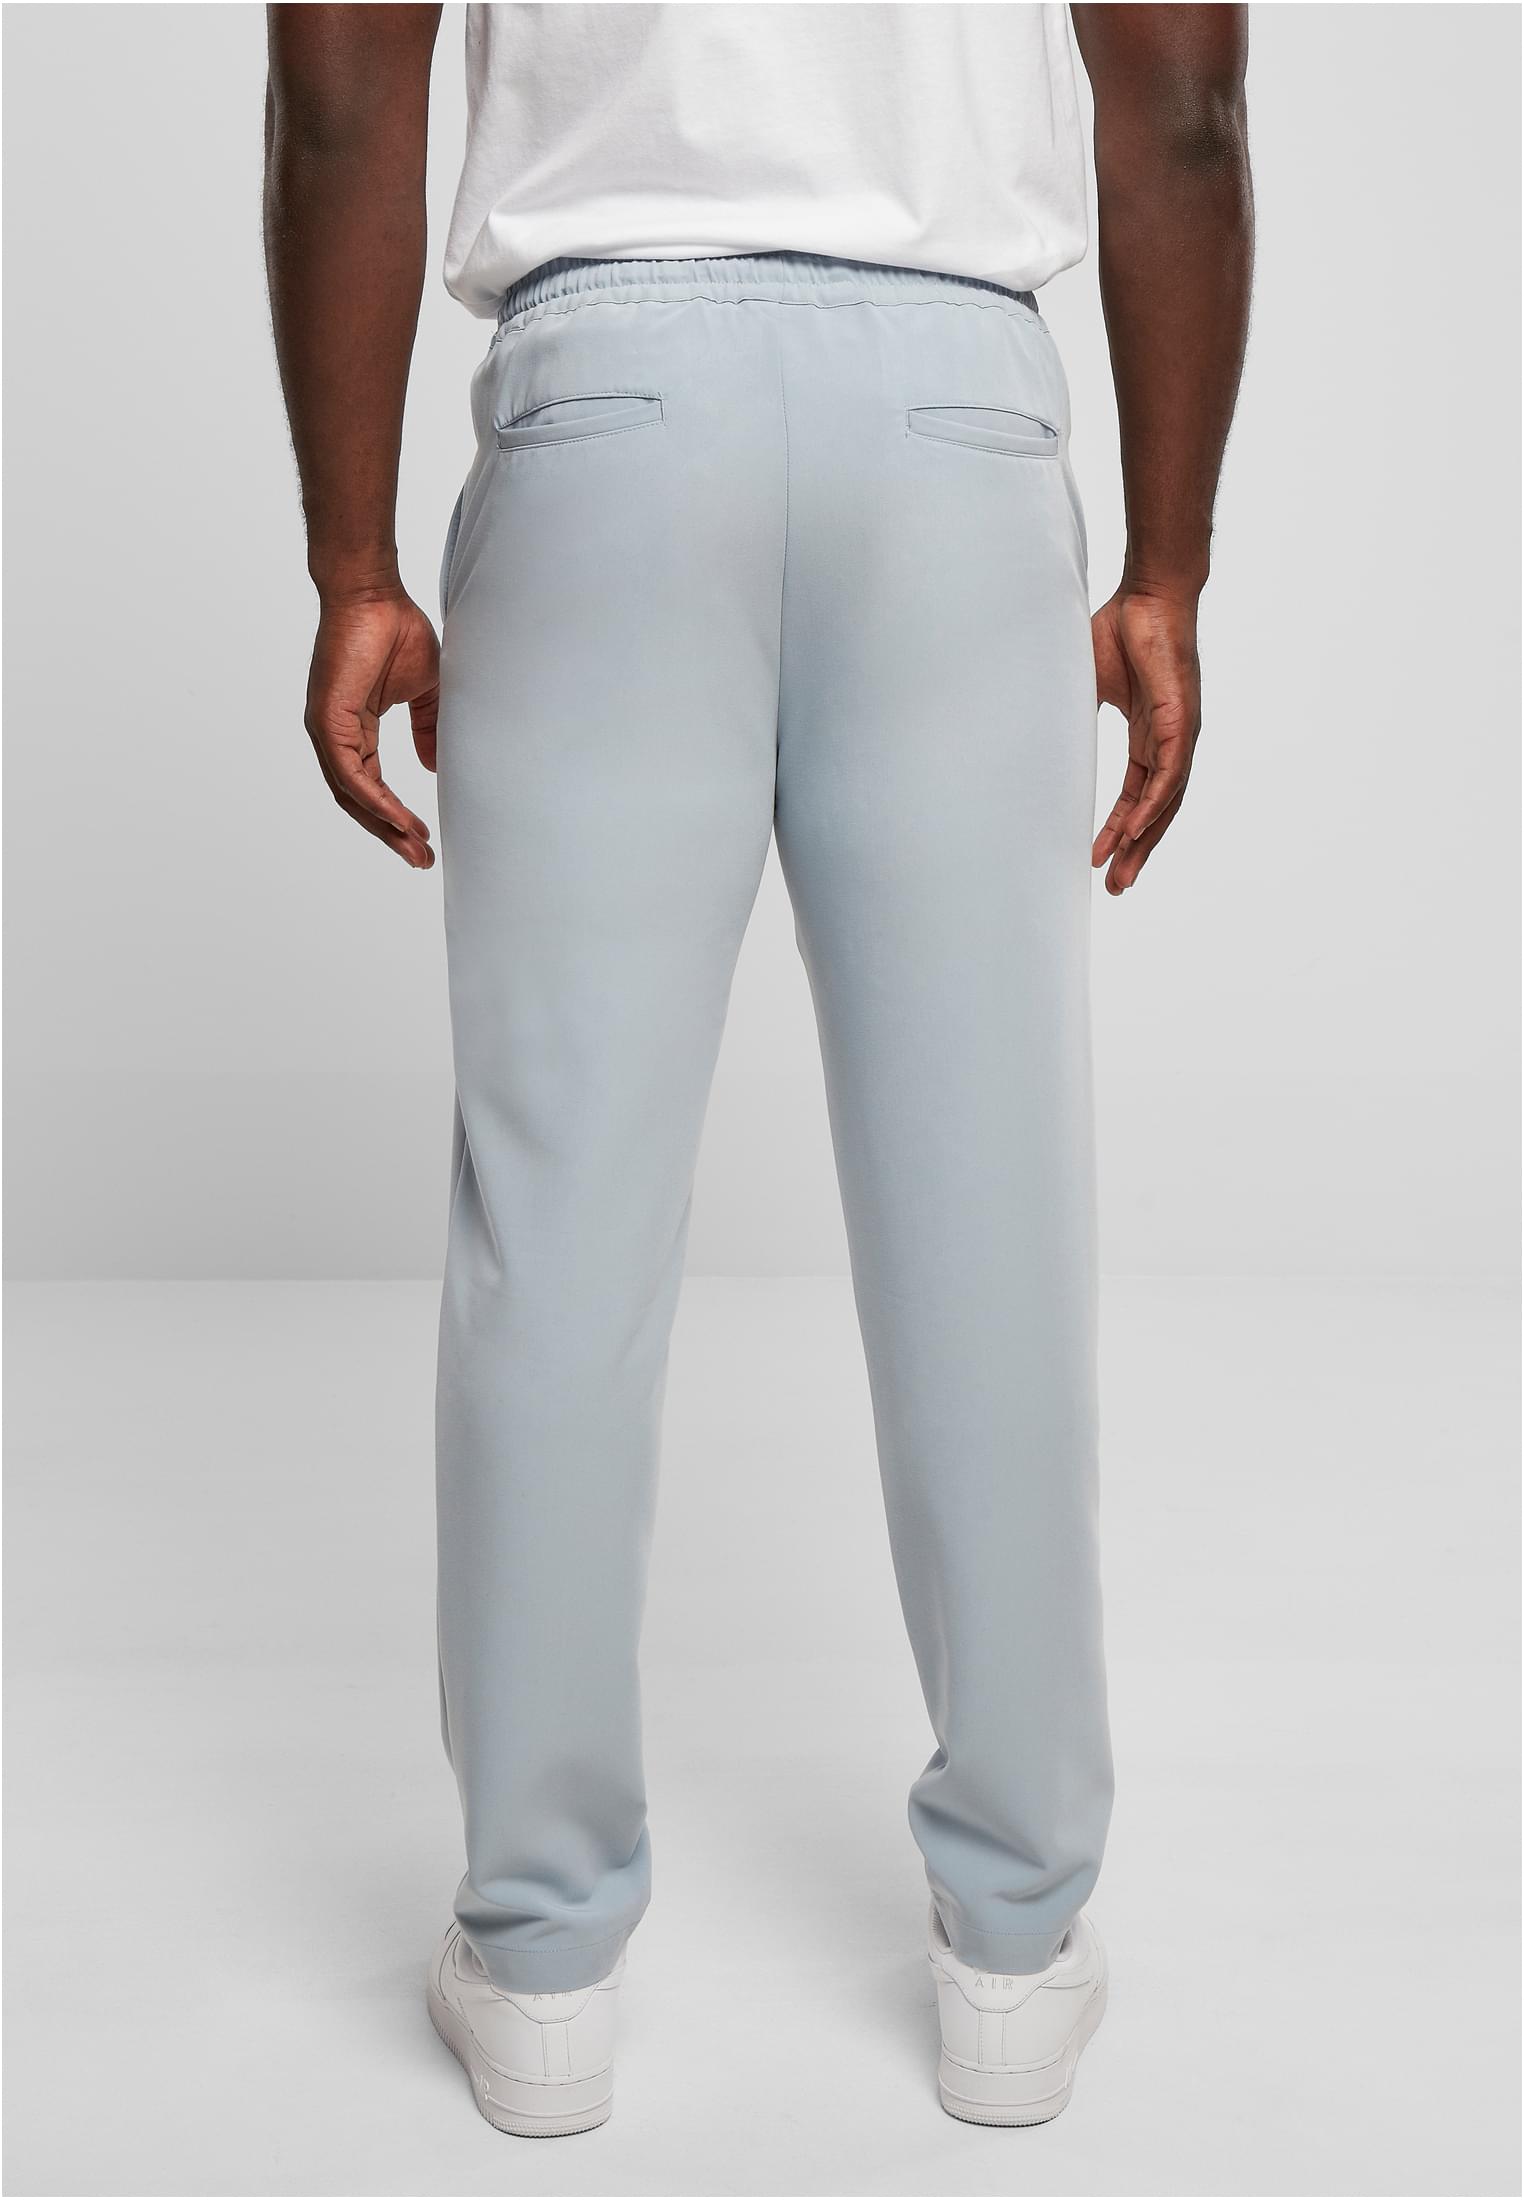 Sweatpants Tapered Jogger Pants in Farbe summerblue